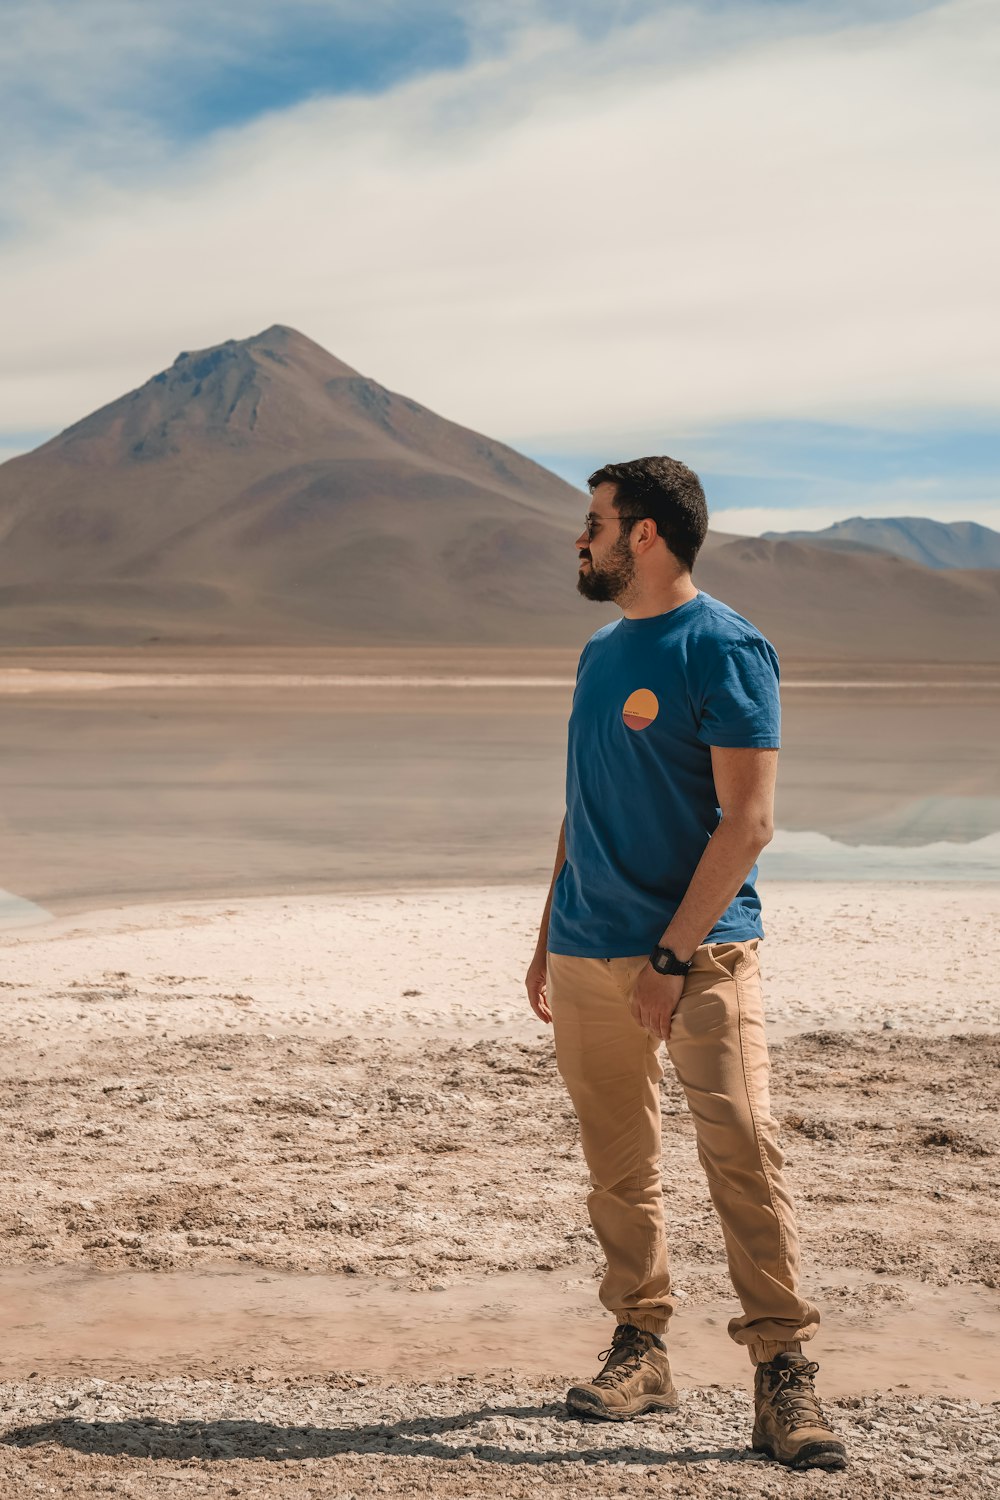 a man standing in the desert with a mountain in the background